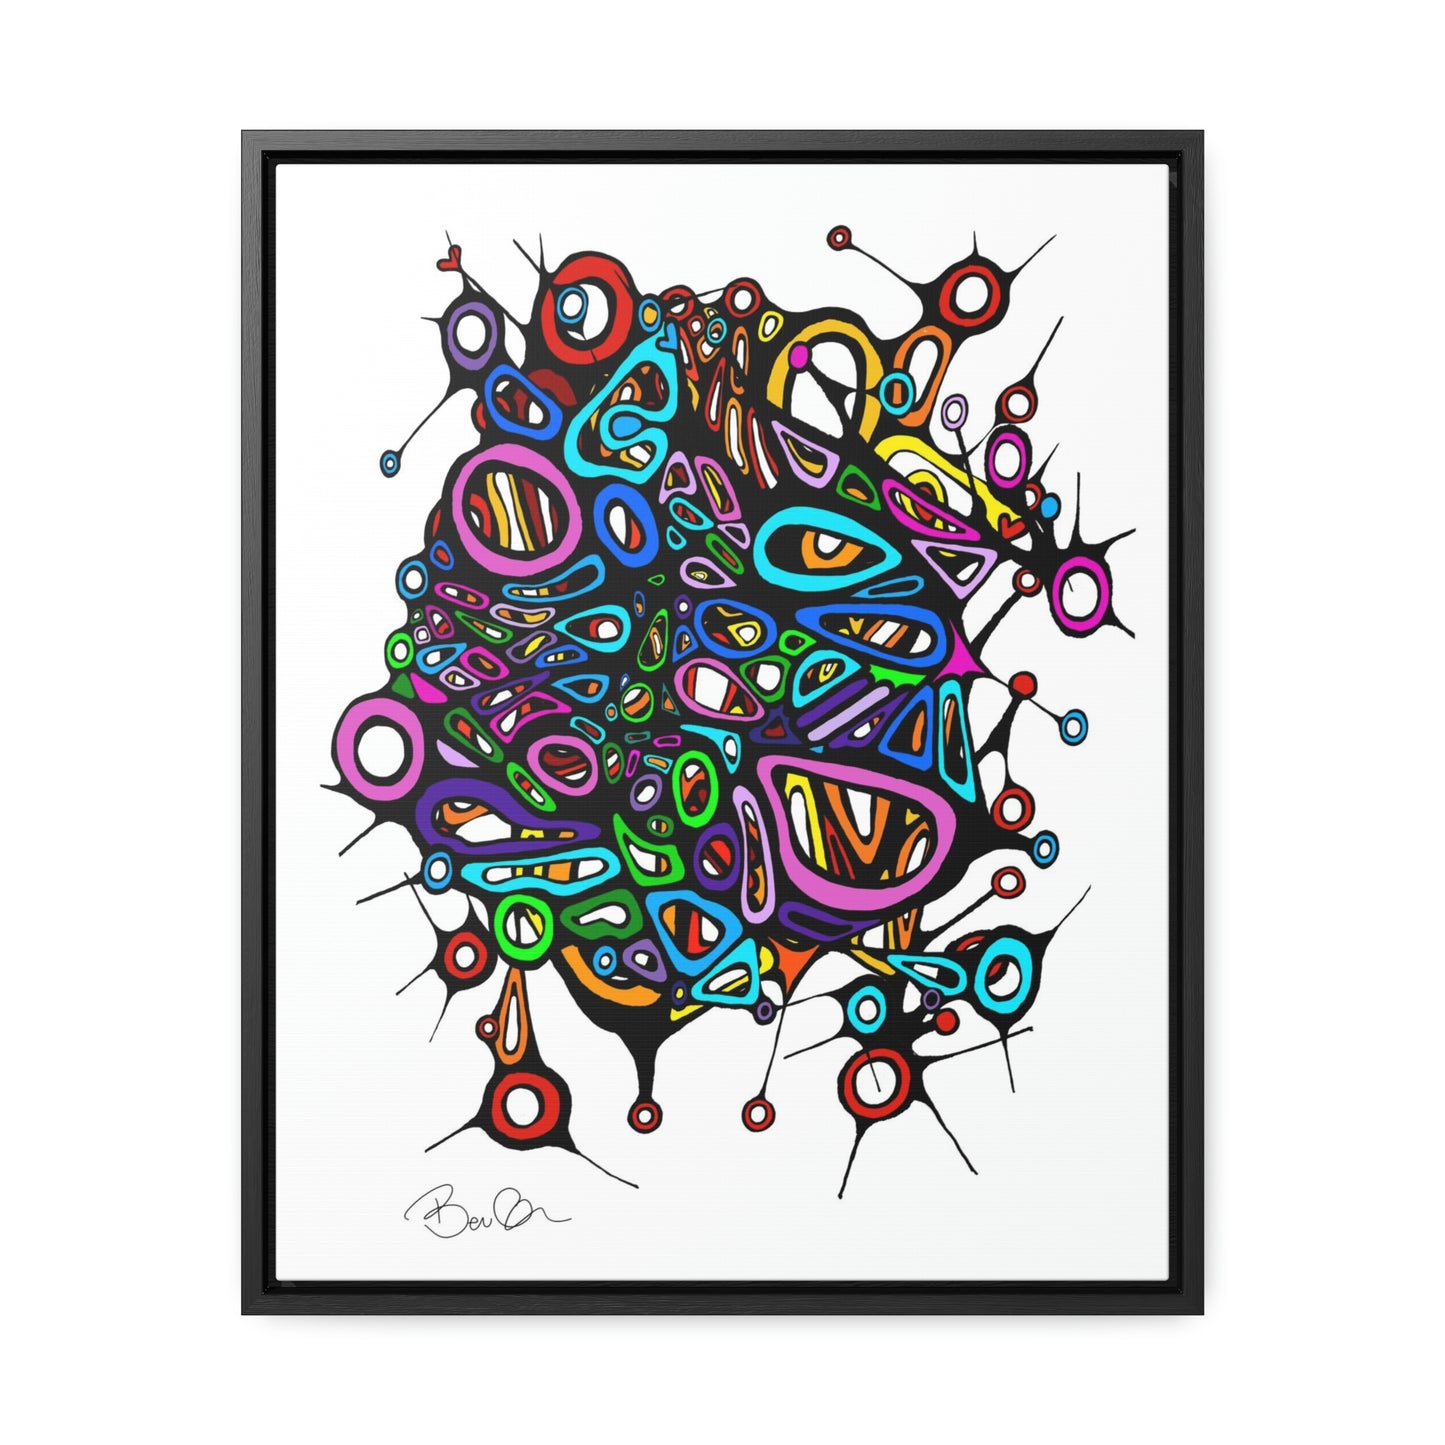 Gallery Canvas Wraps - "Unseen Hearts:" - Framed Doodle Painting with Hidden Heart